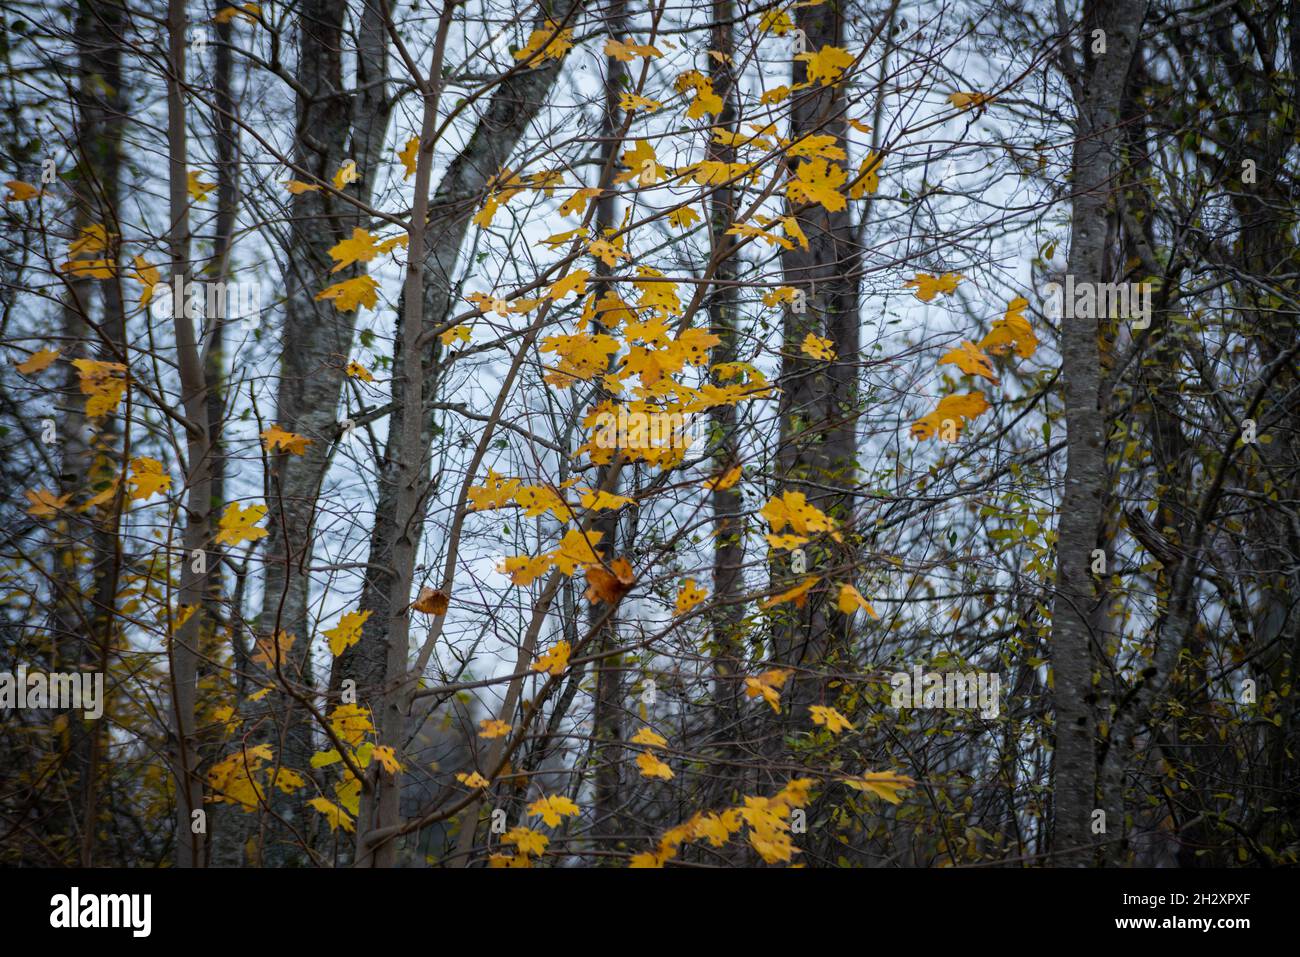 Yellow autumn birch leaves with black spots in a forest of withered trees. Stock Photo